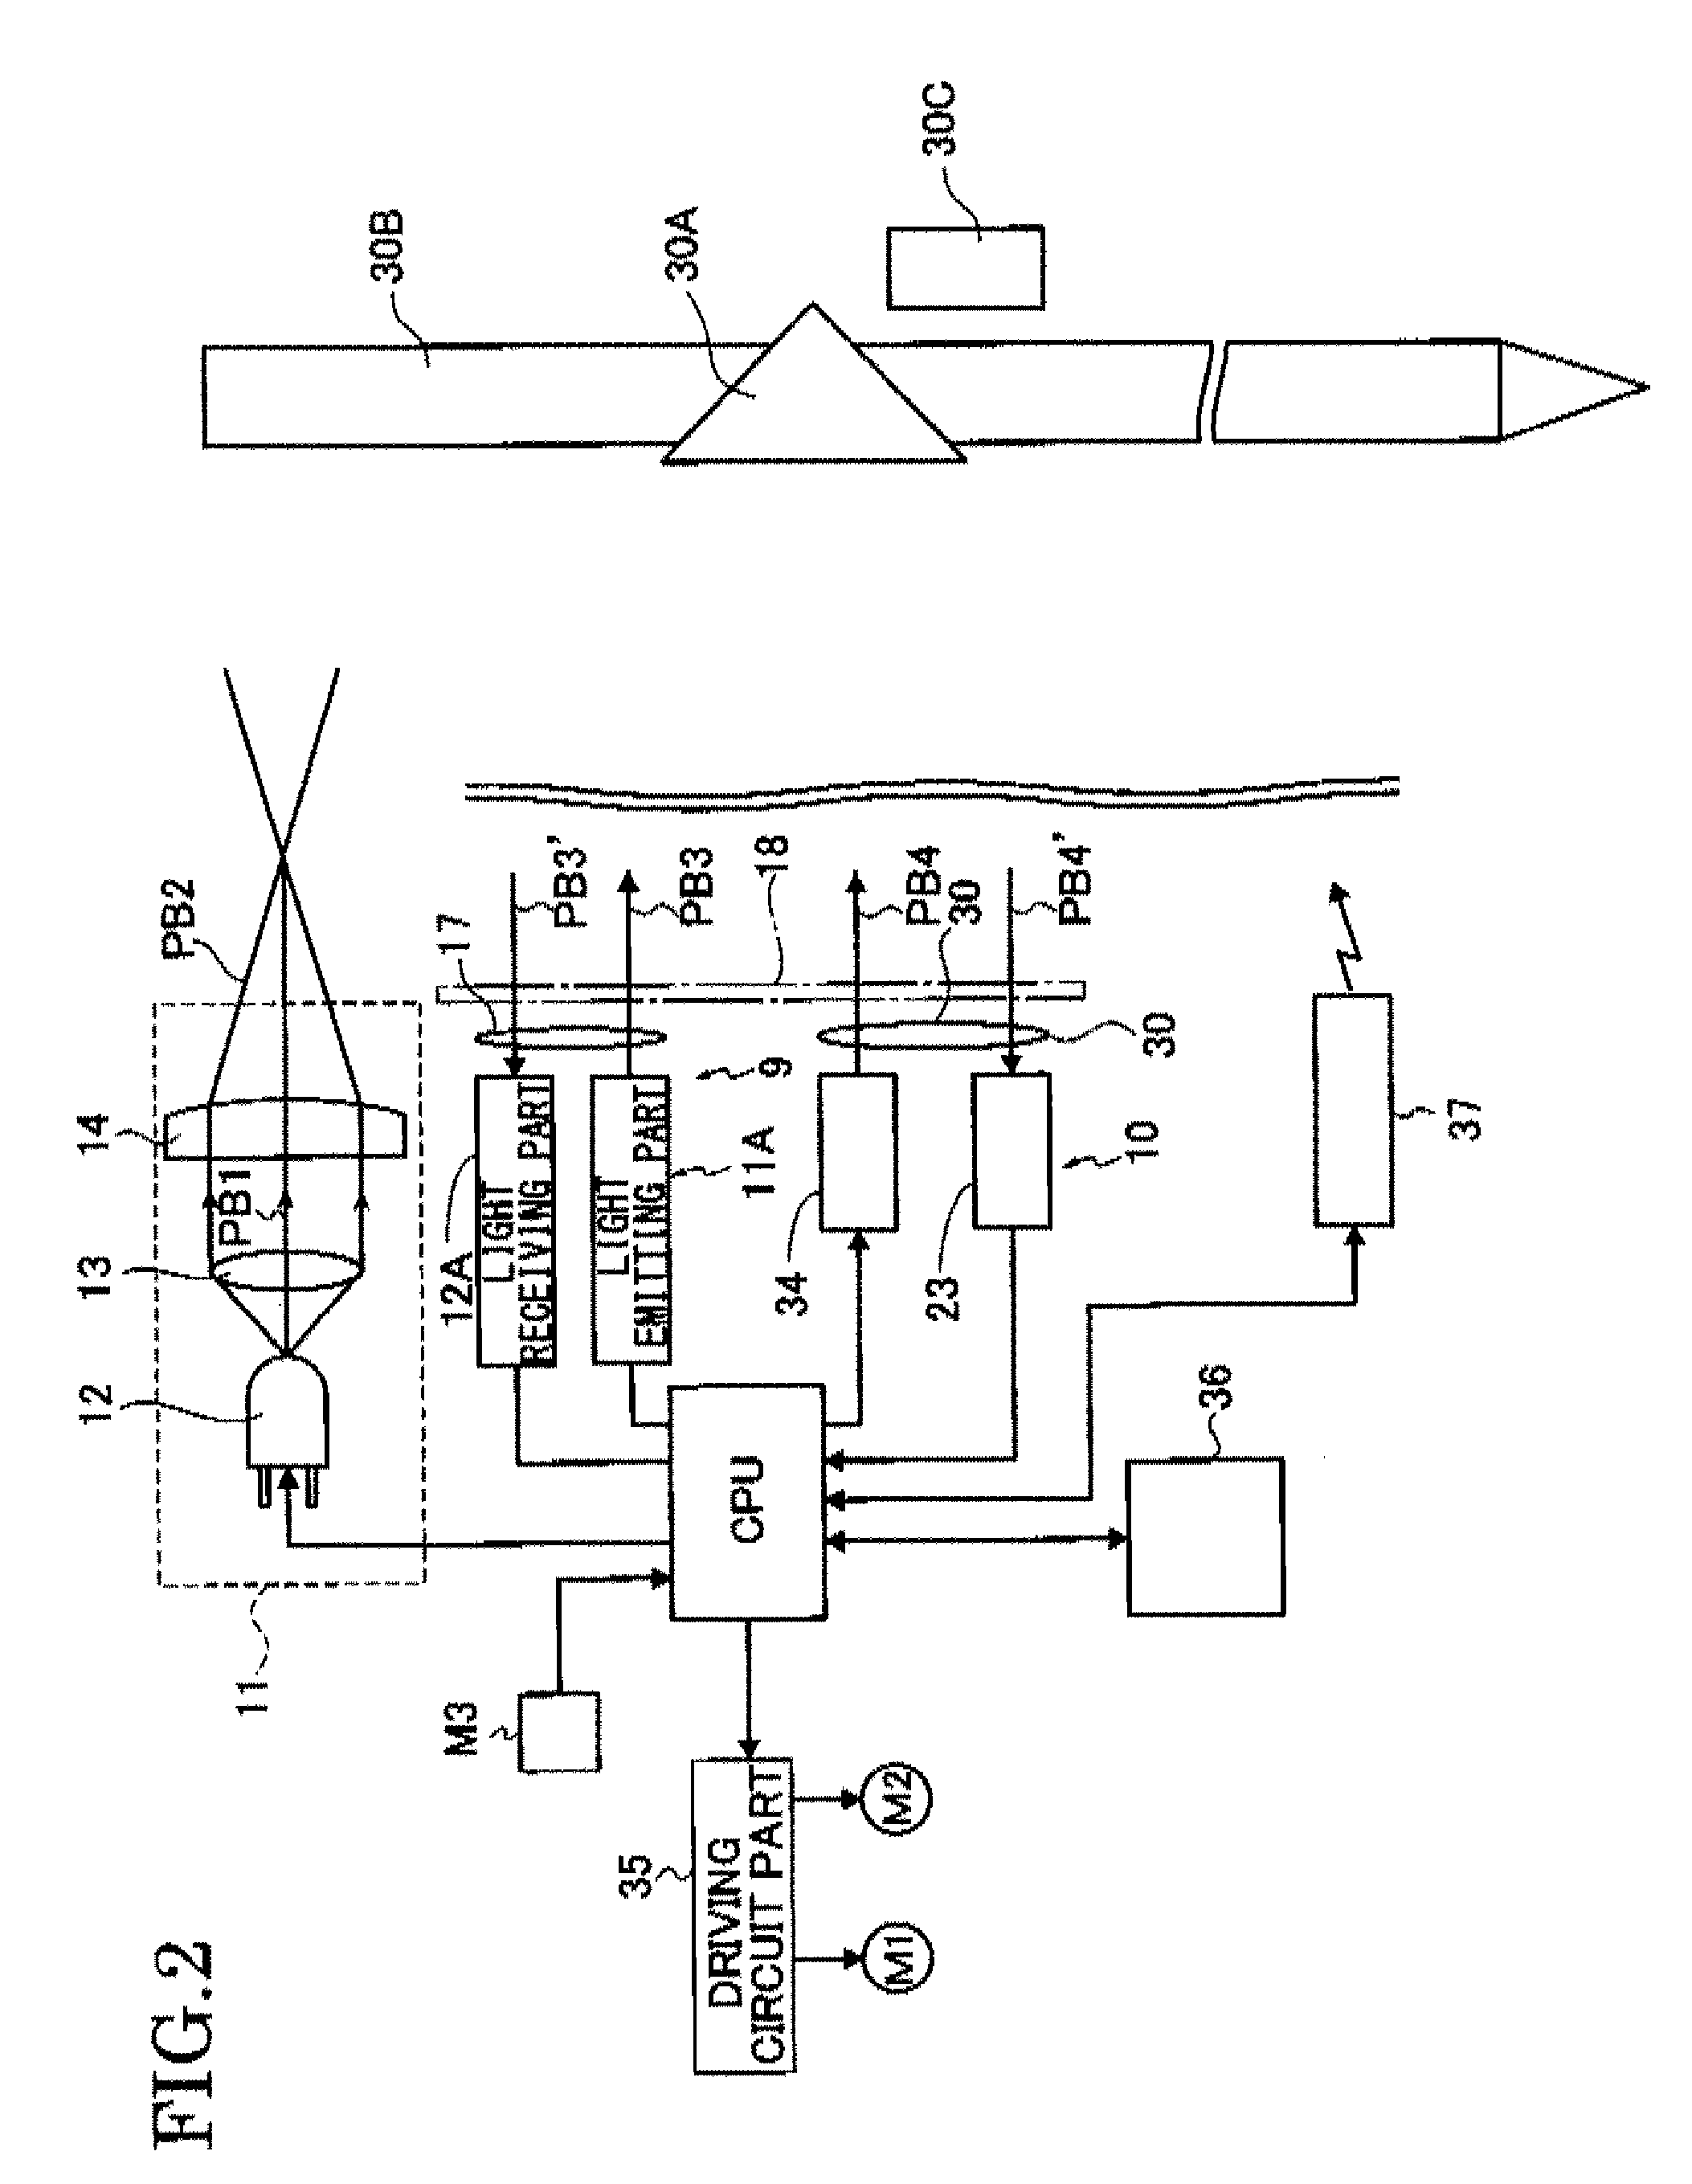 Guide light device, survey apparatus having the guide light device, survey system using the survey apparatus, survey pole used in the survey system, and mobile wireless transceiver used in the survey system